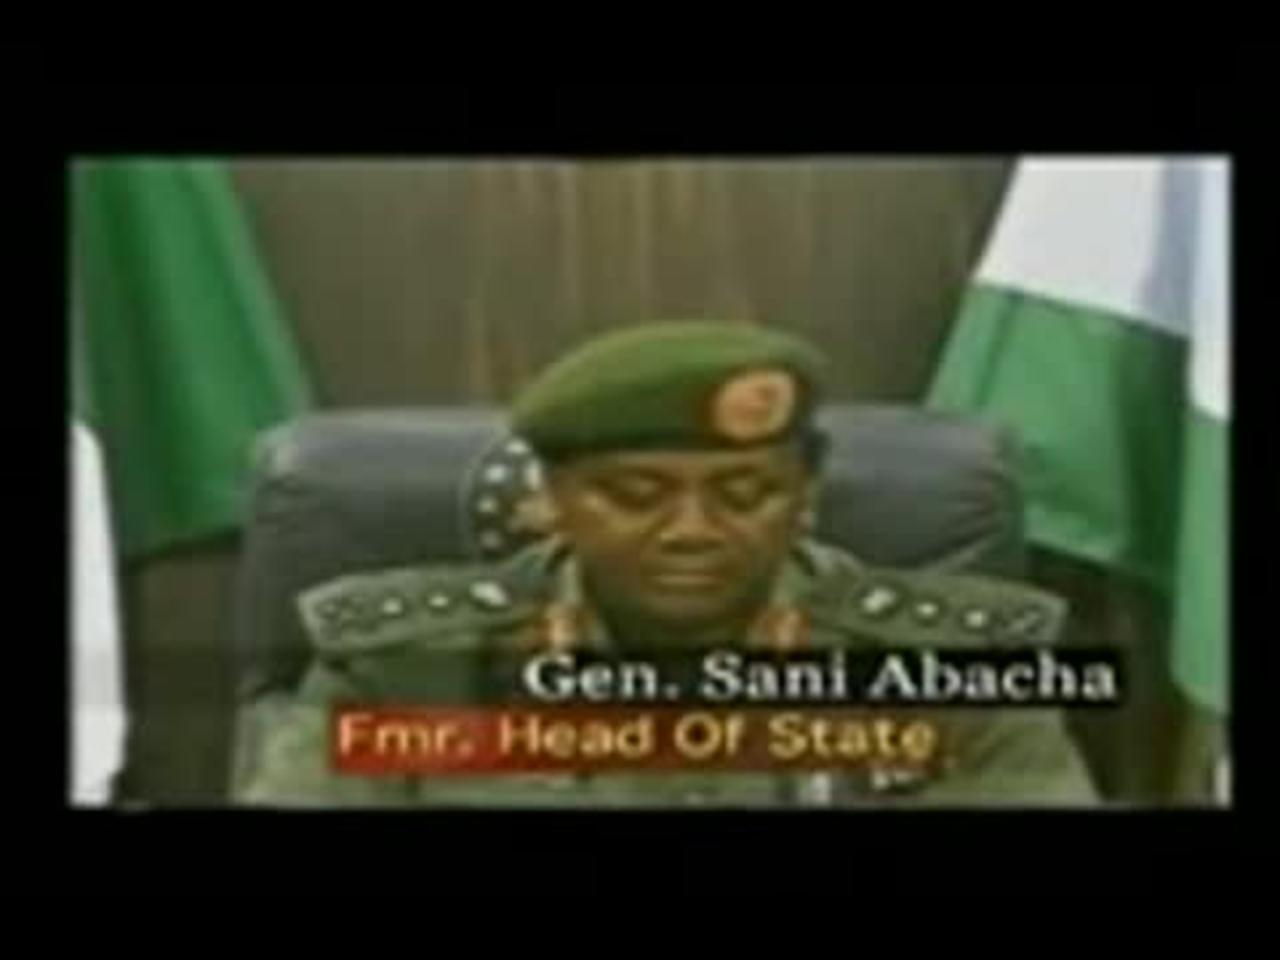 Late General Sani Abacha Speech after overthrow of Goverment